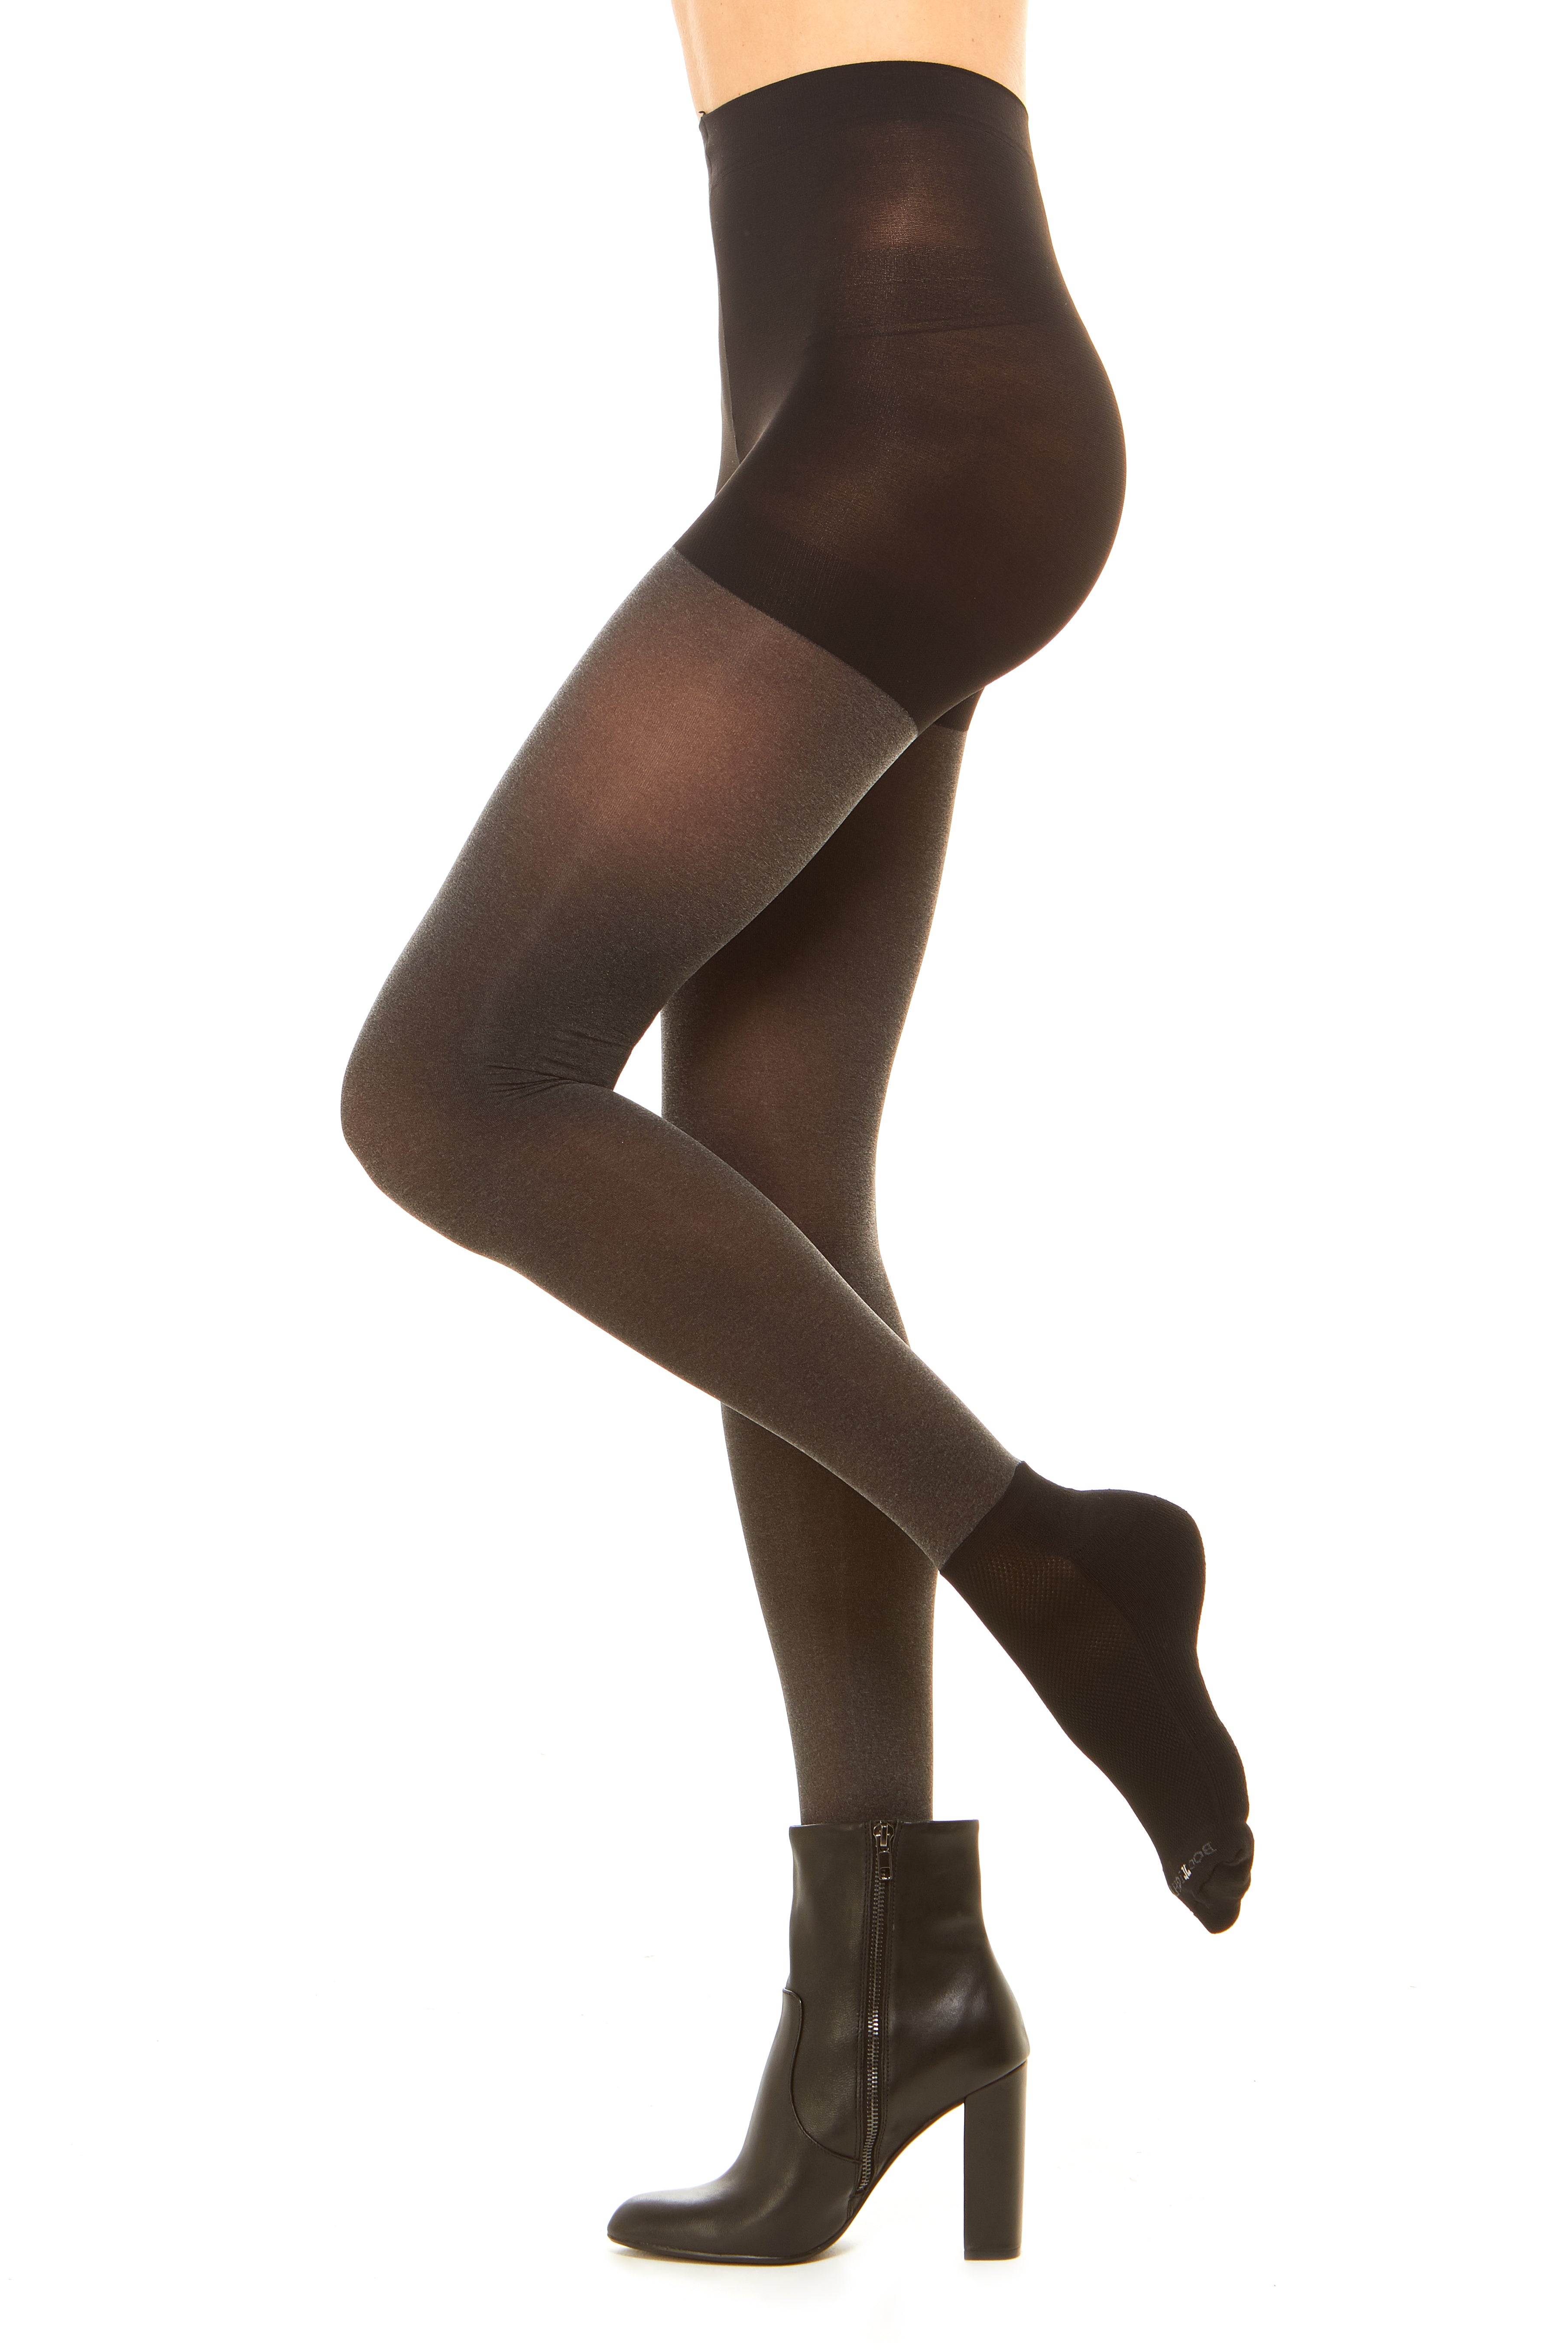 Core Essentials Semi-Opaque Tights with Socks for Boots – Bootights